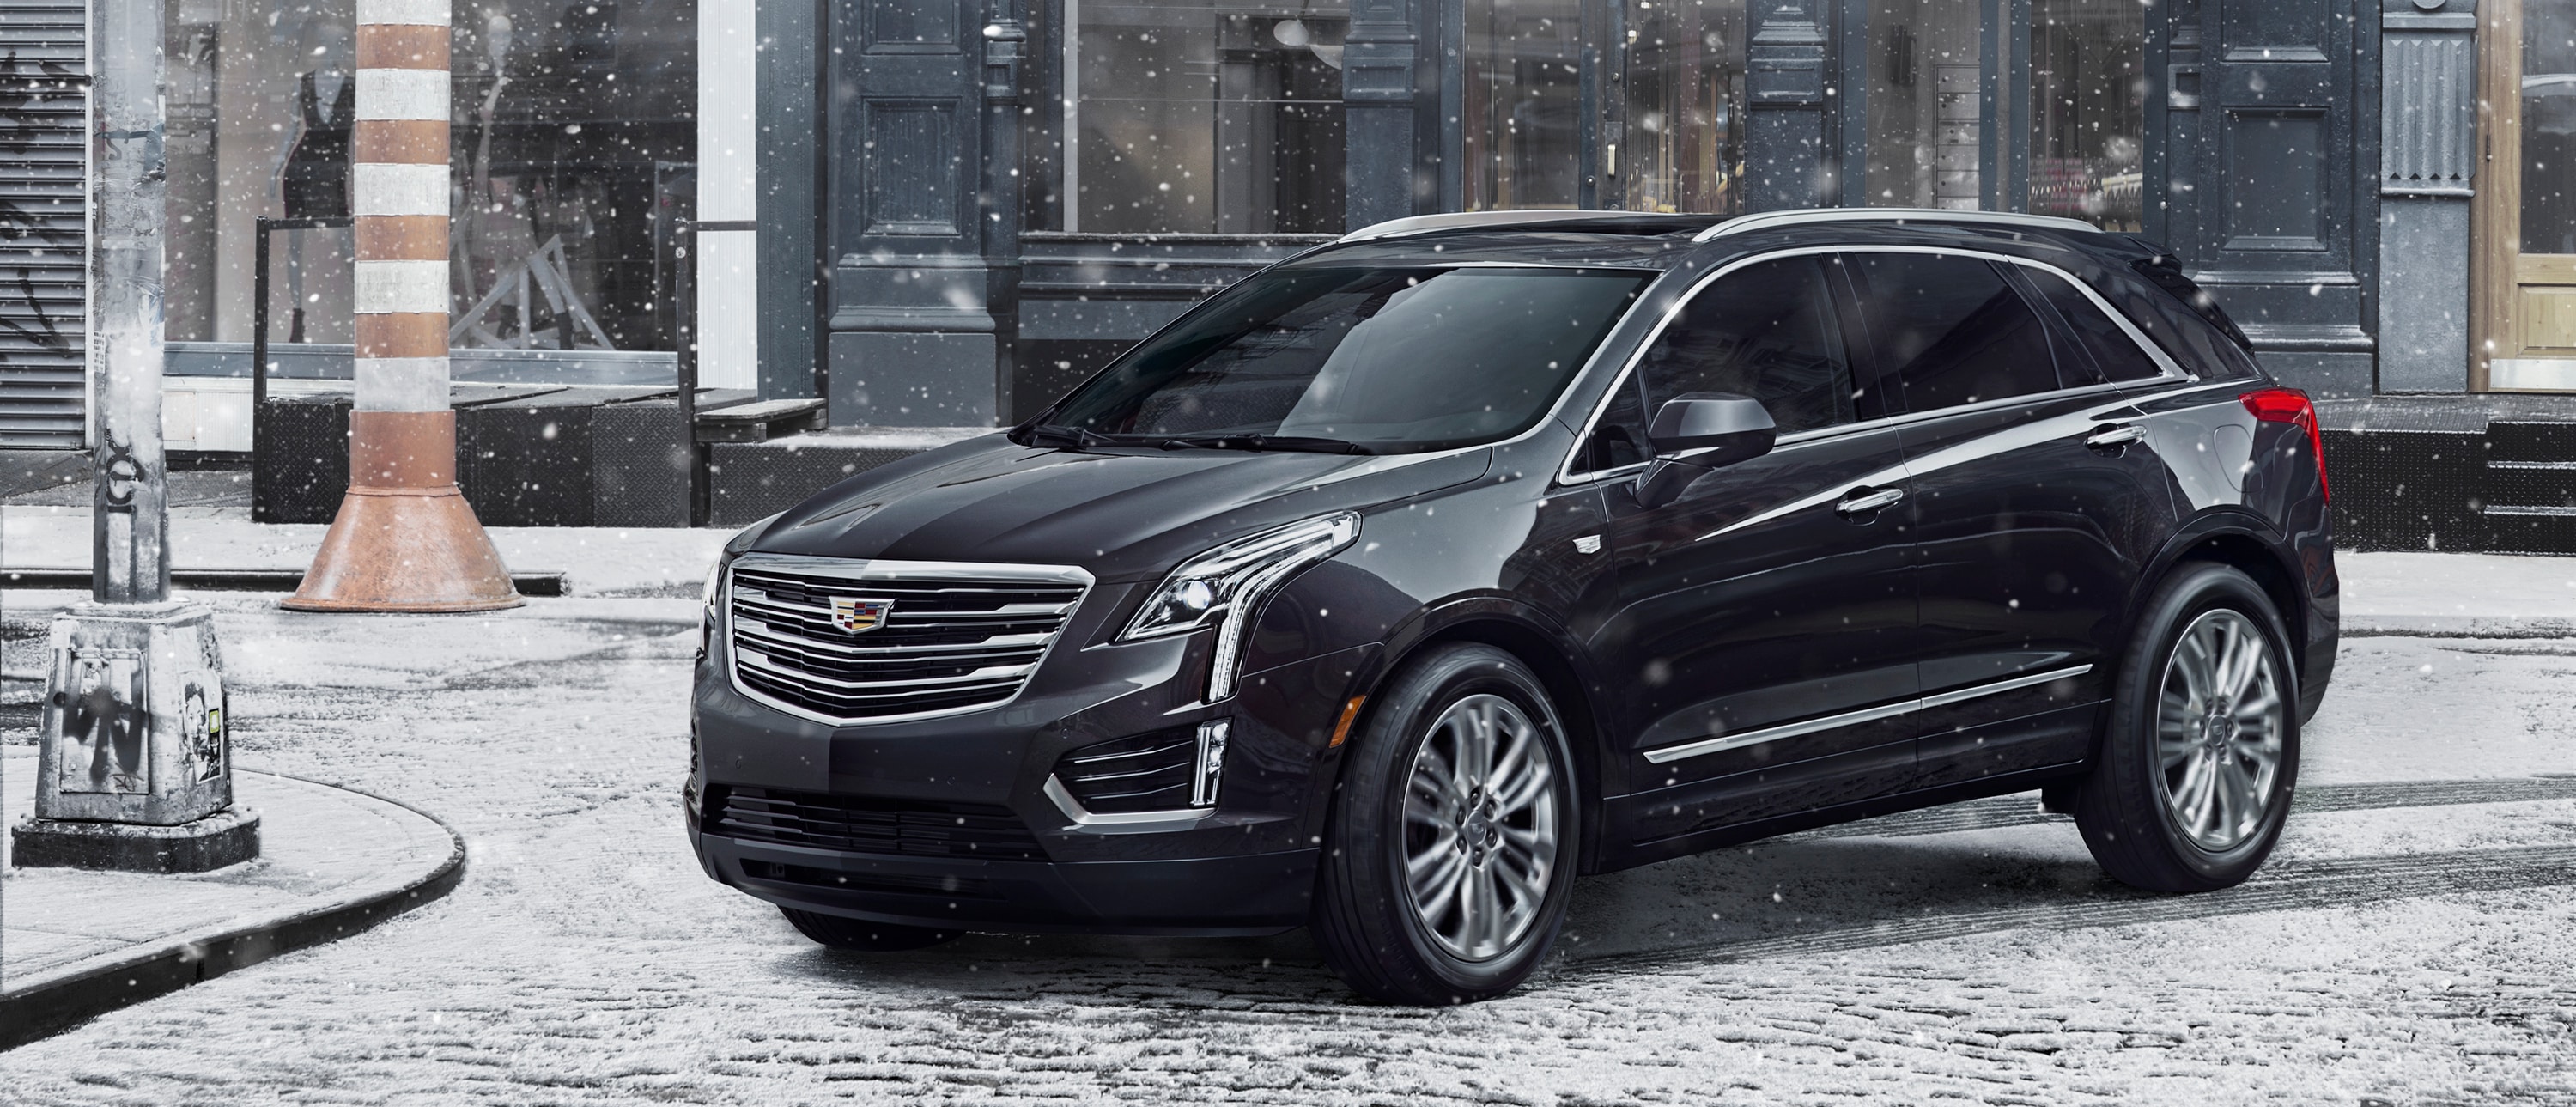 New Cadillac XT5 SUV For Sale Near Youngstown